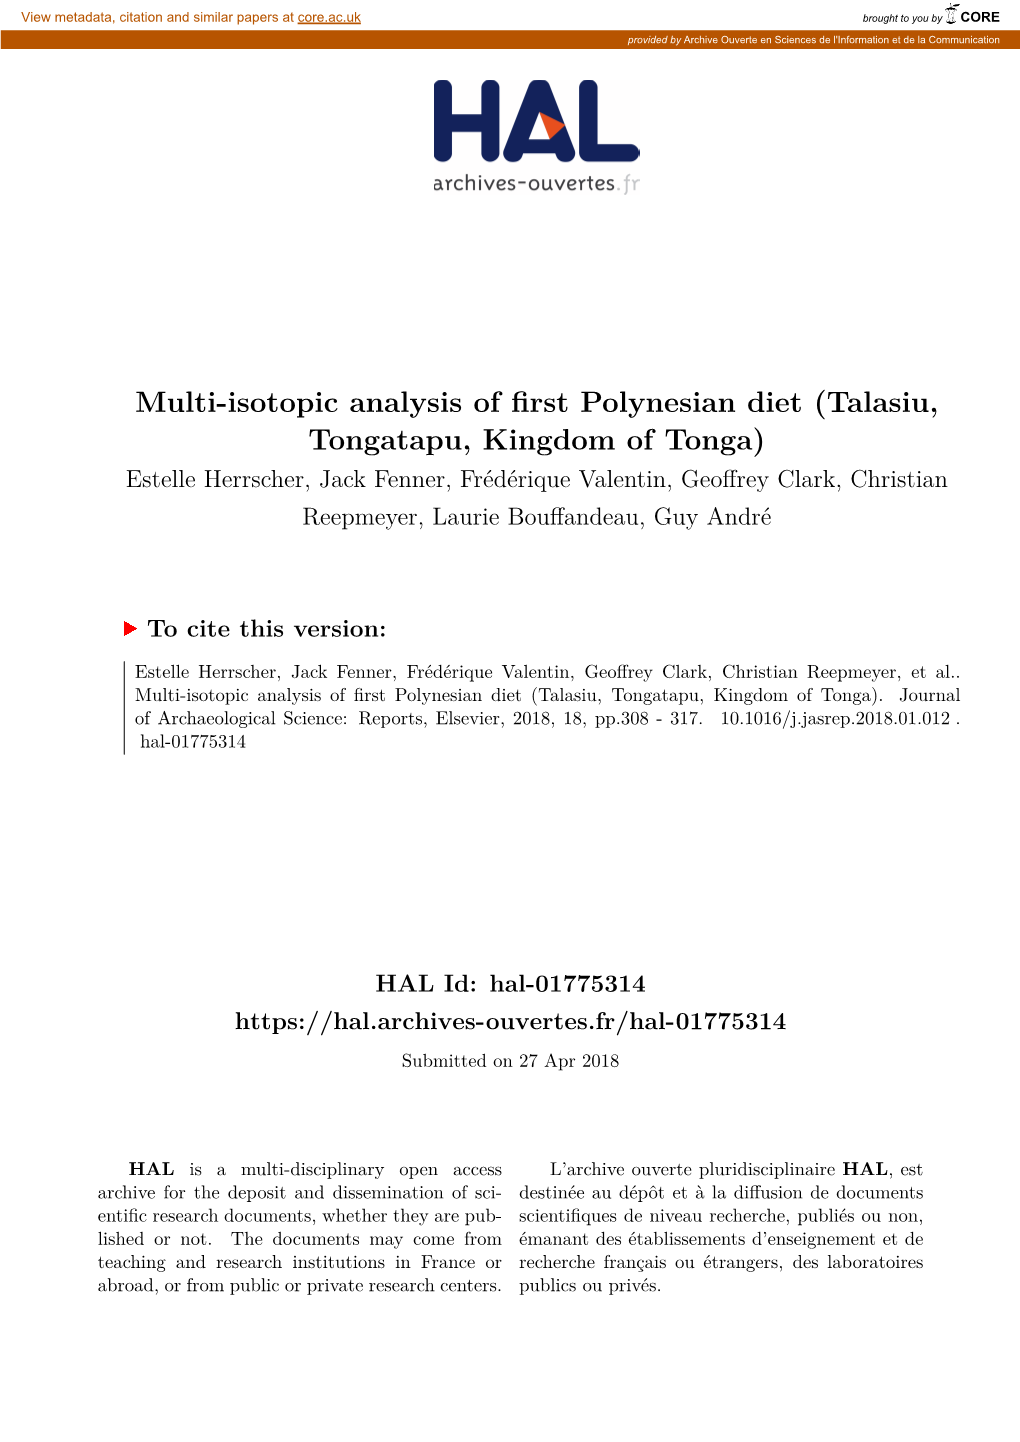 Multi-Isotopic Analysis of First Polynesian Diet (Talasiu